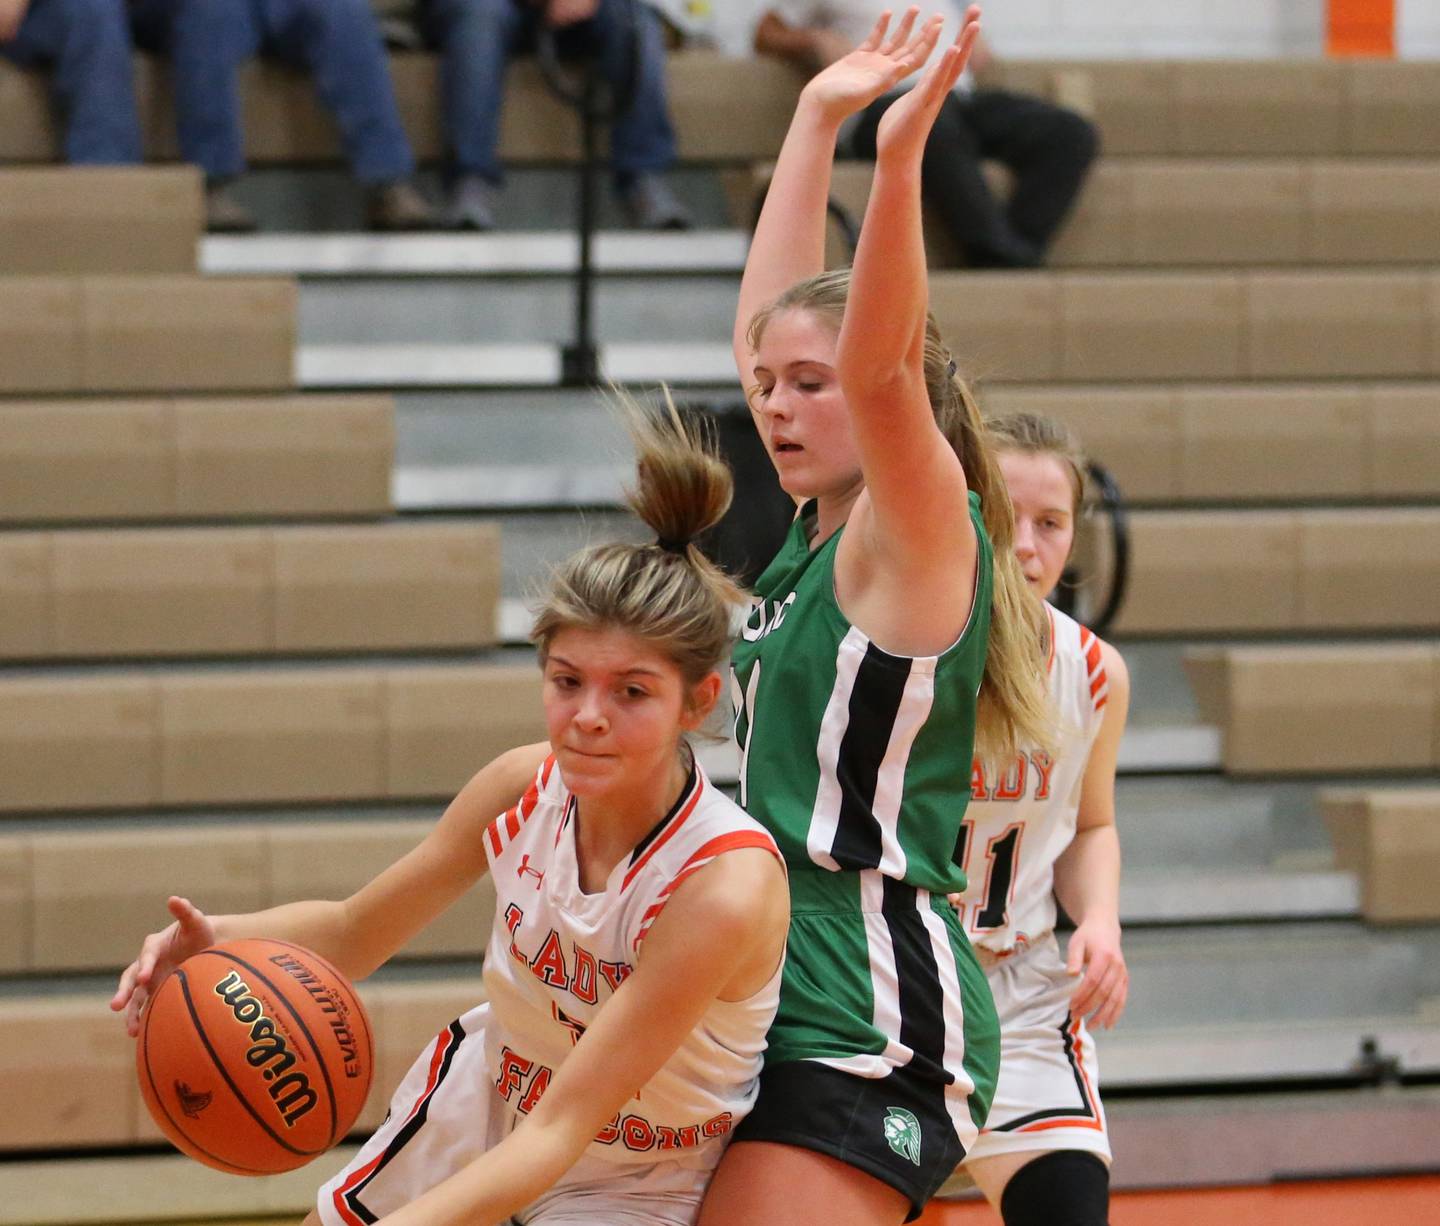 Flanagan-Cornell Woodland's Emme Wallace (2) looks to run past Dwight's Amelia Ulrich (14) in the Integrated Seed Lady Falcon Basketball Classic tournament on Thursday, Nov. 17, 2022 in Flanagan.